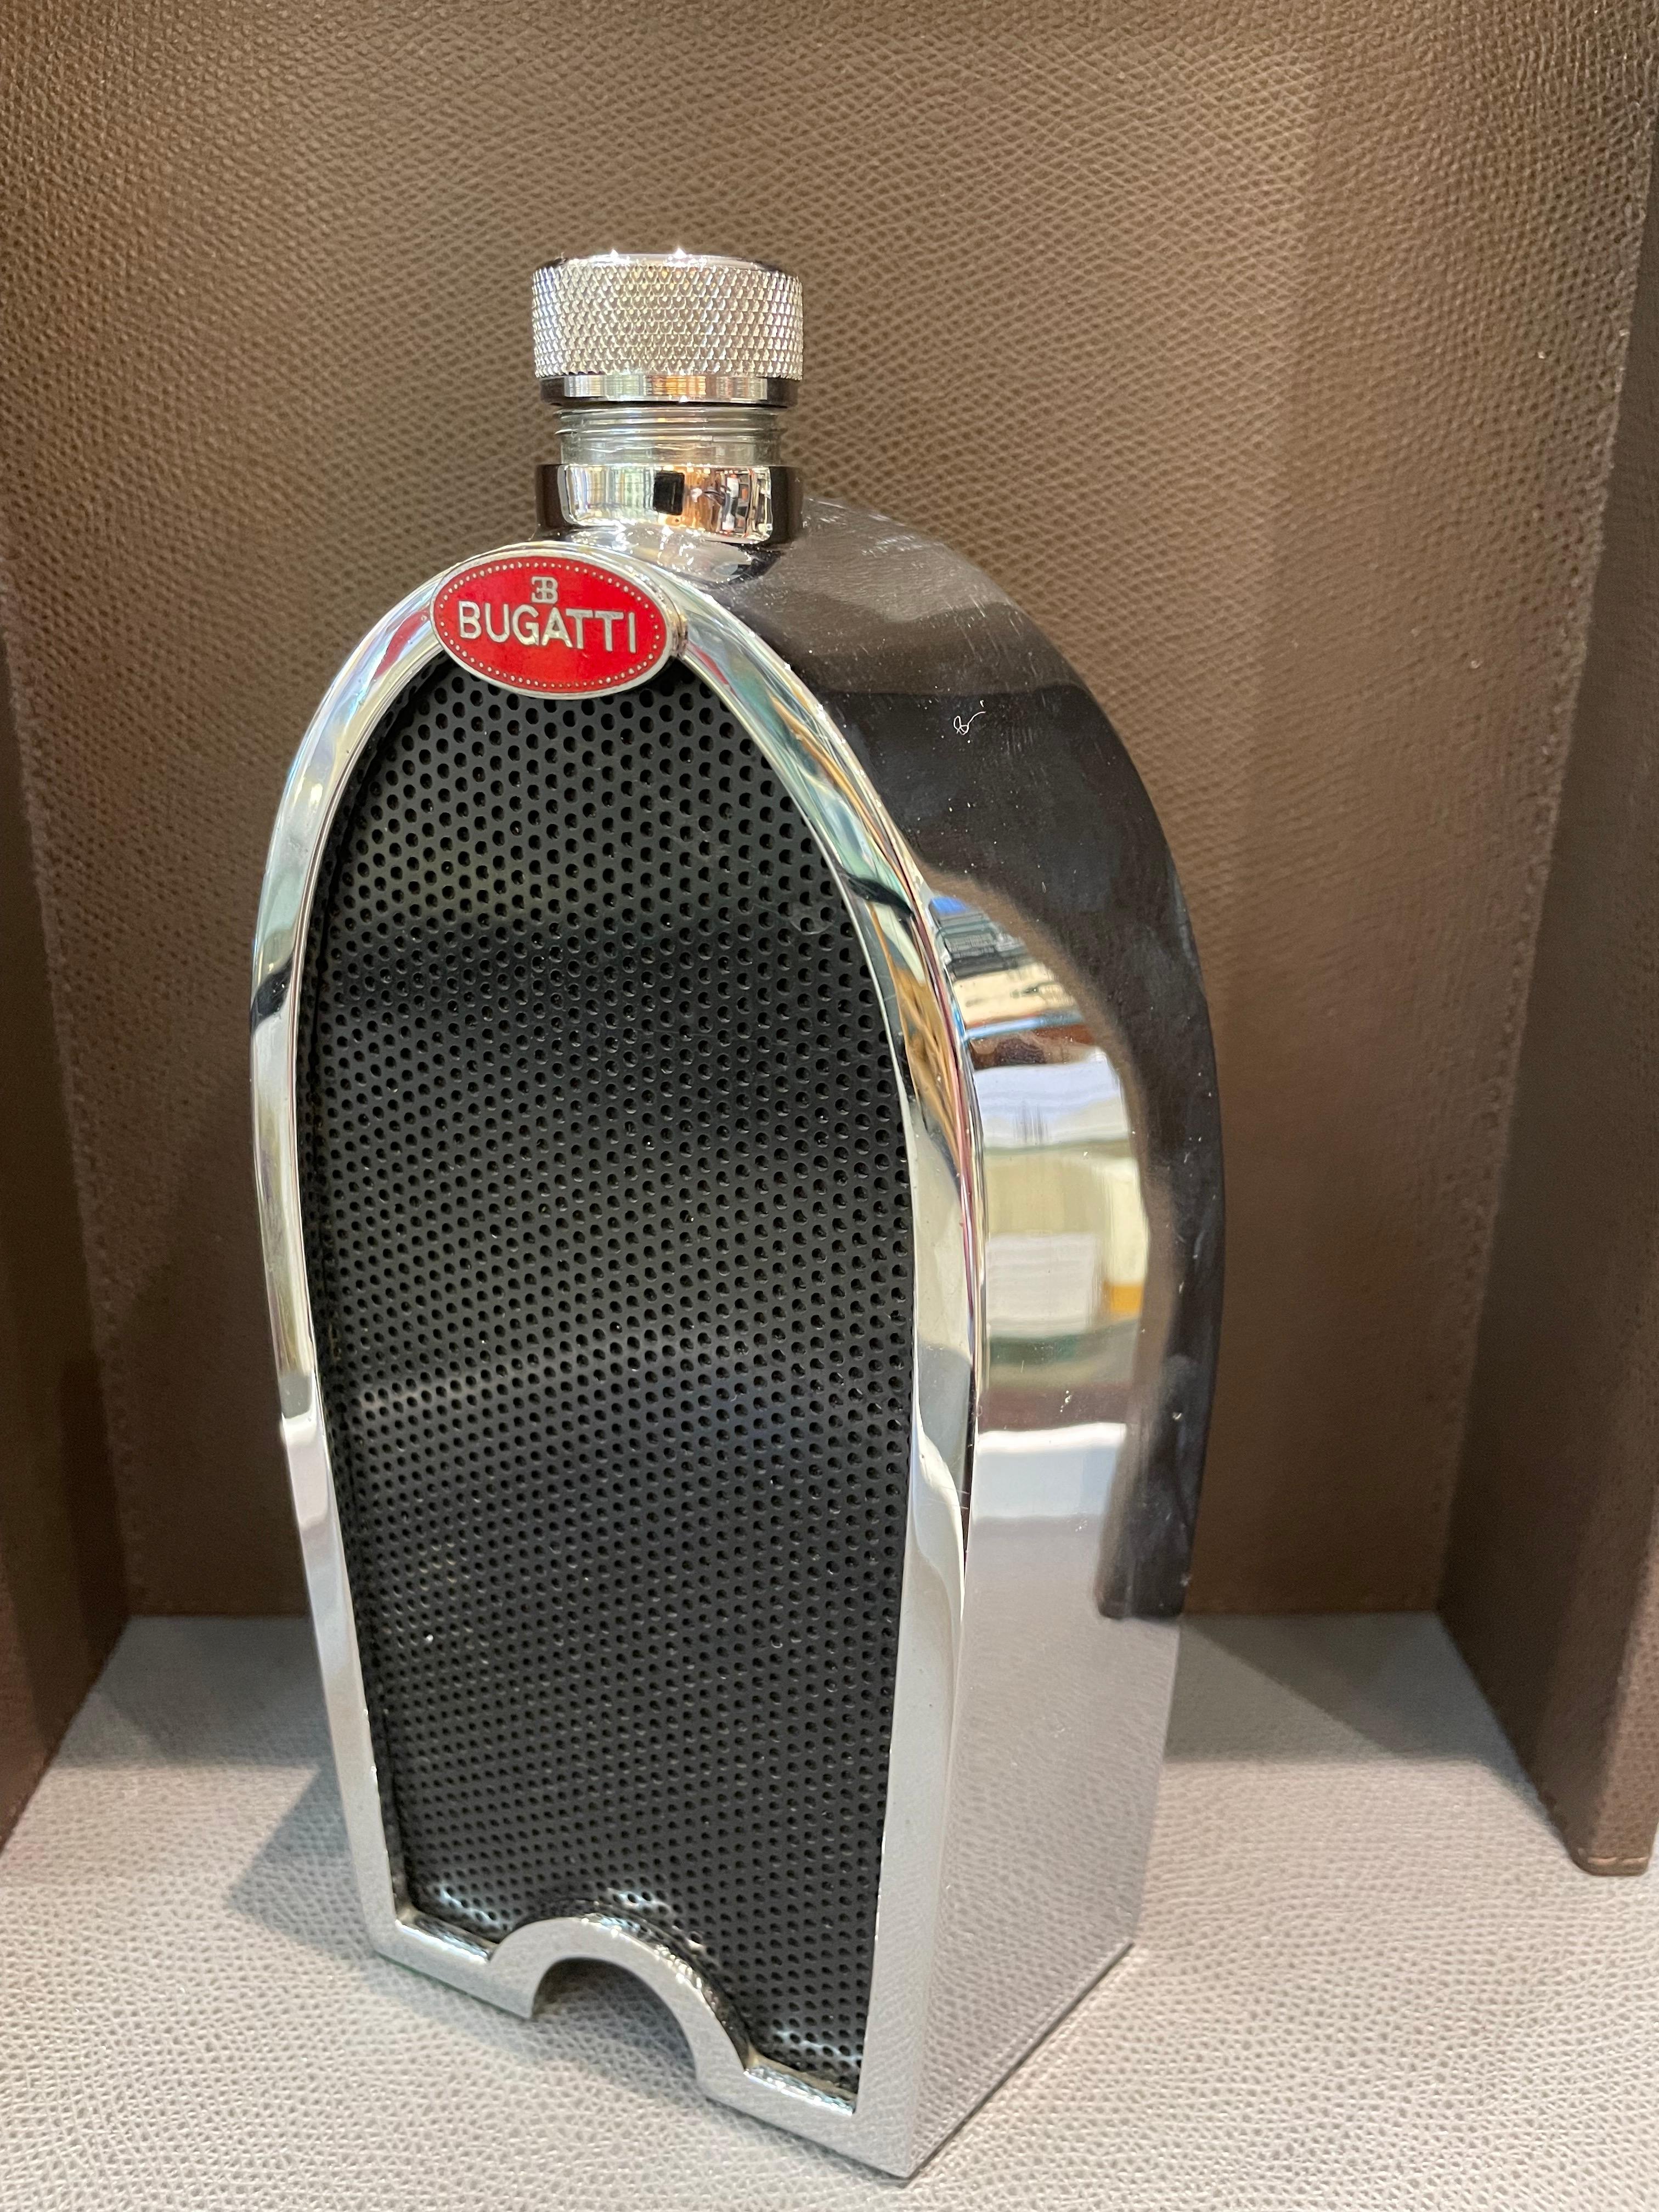 Iconic and identifiable car radiators and grills have evolved into objects of beauty. This rare and vintage Ruddspeed decanter is a unique collectible piece in pristine condition. This Bugatti decanter is fully functional lined with glass. Heavily